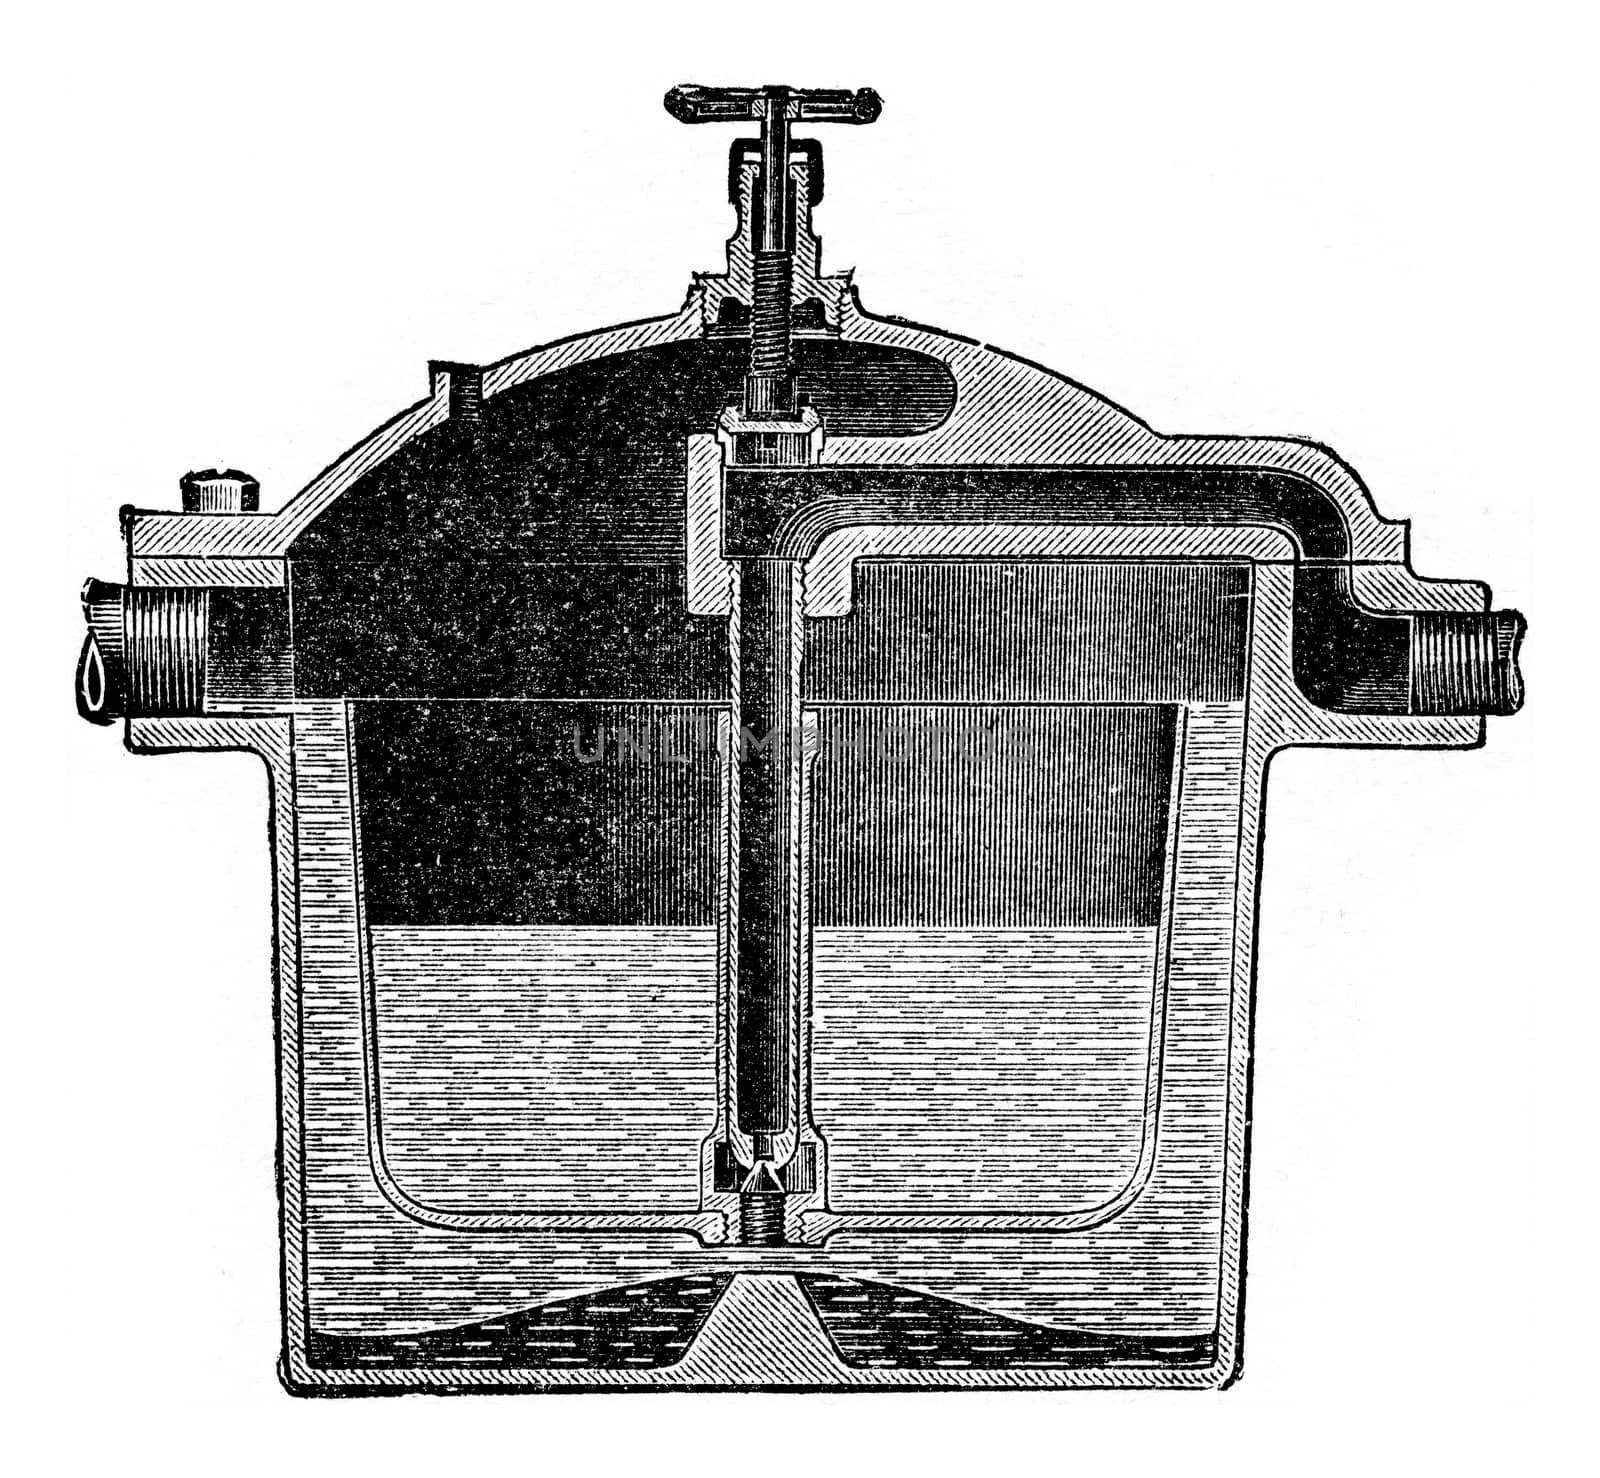 Automatic drain cup, vintage engraved illustration.
